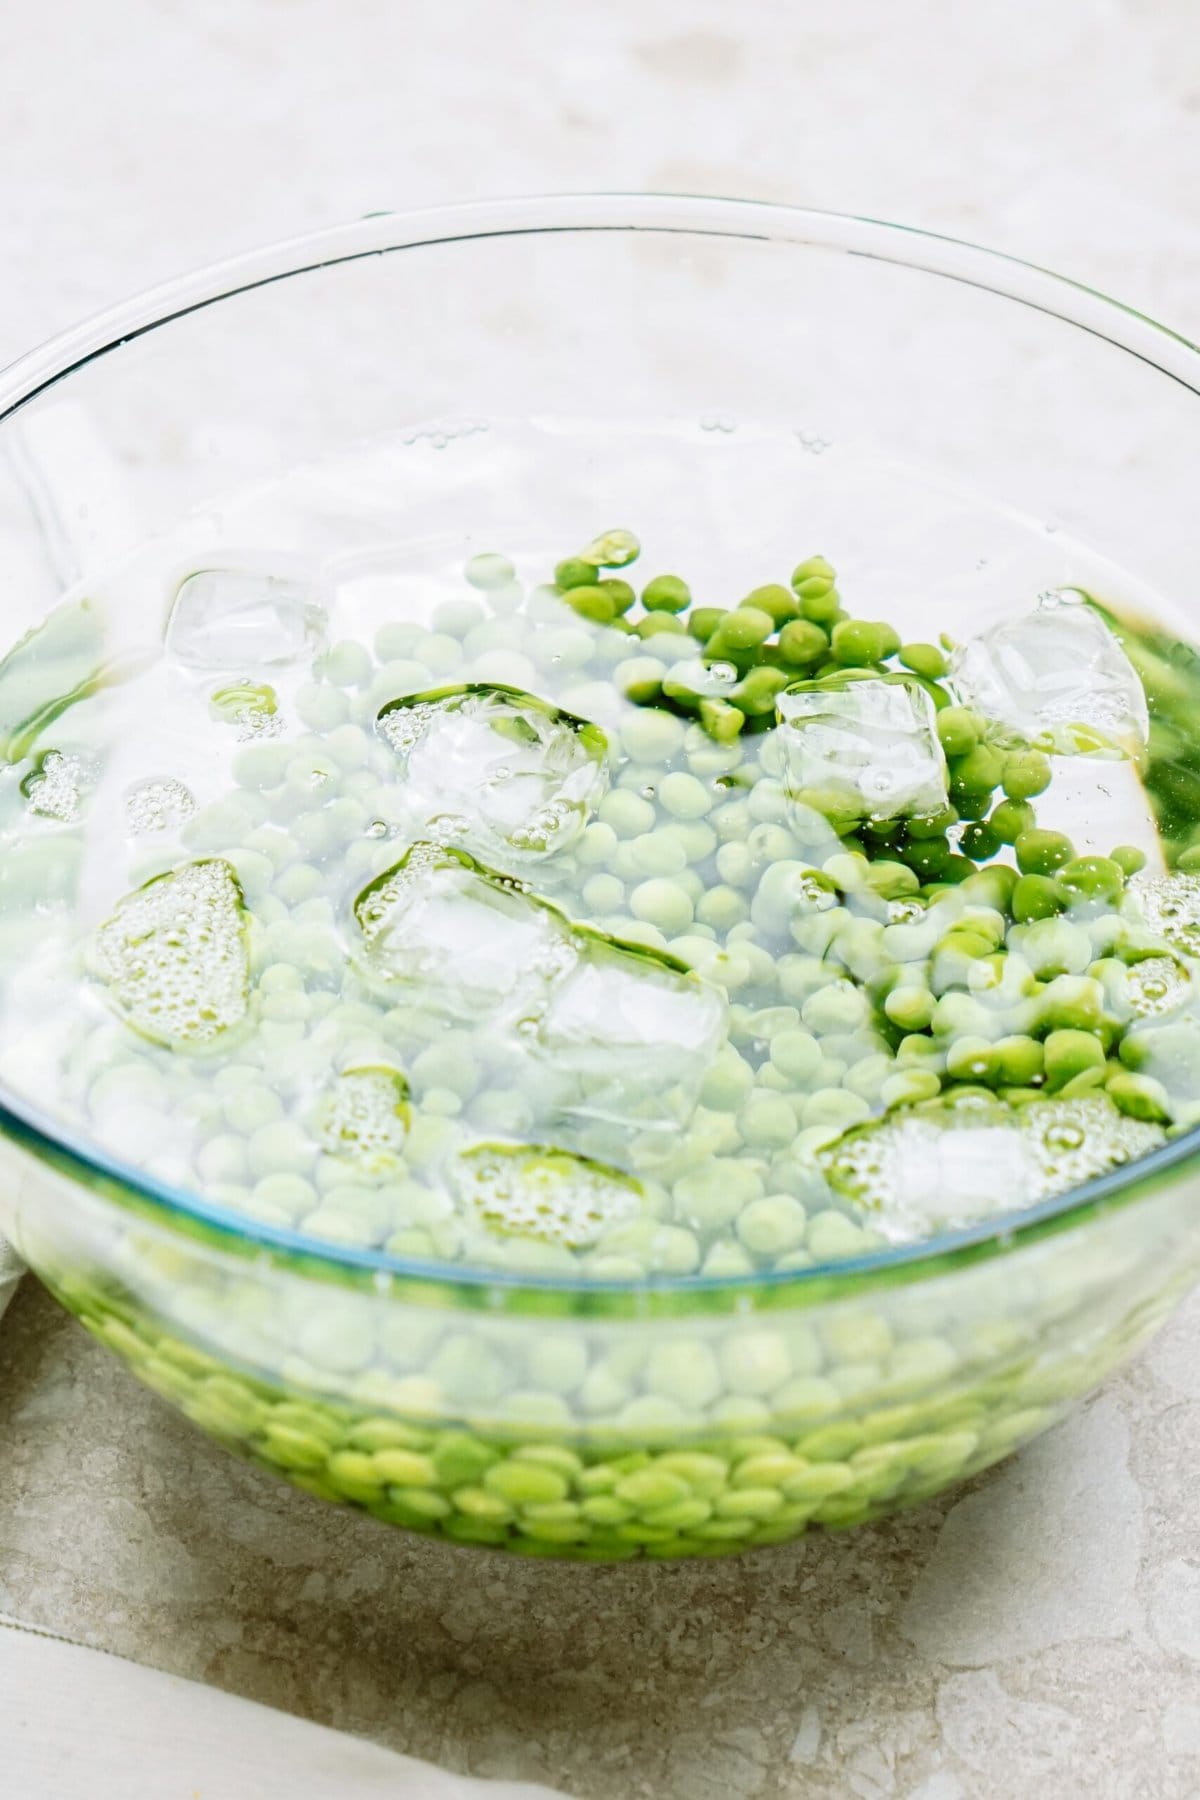 Pea salad soaking in water with ice cubes in a glass bowl.